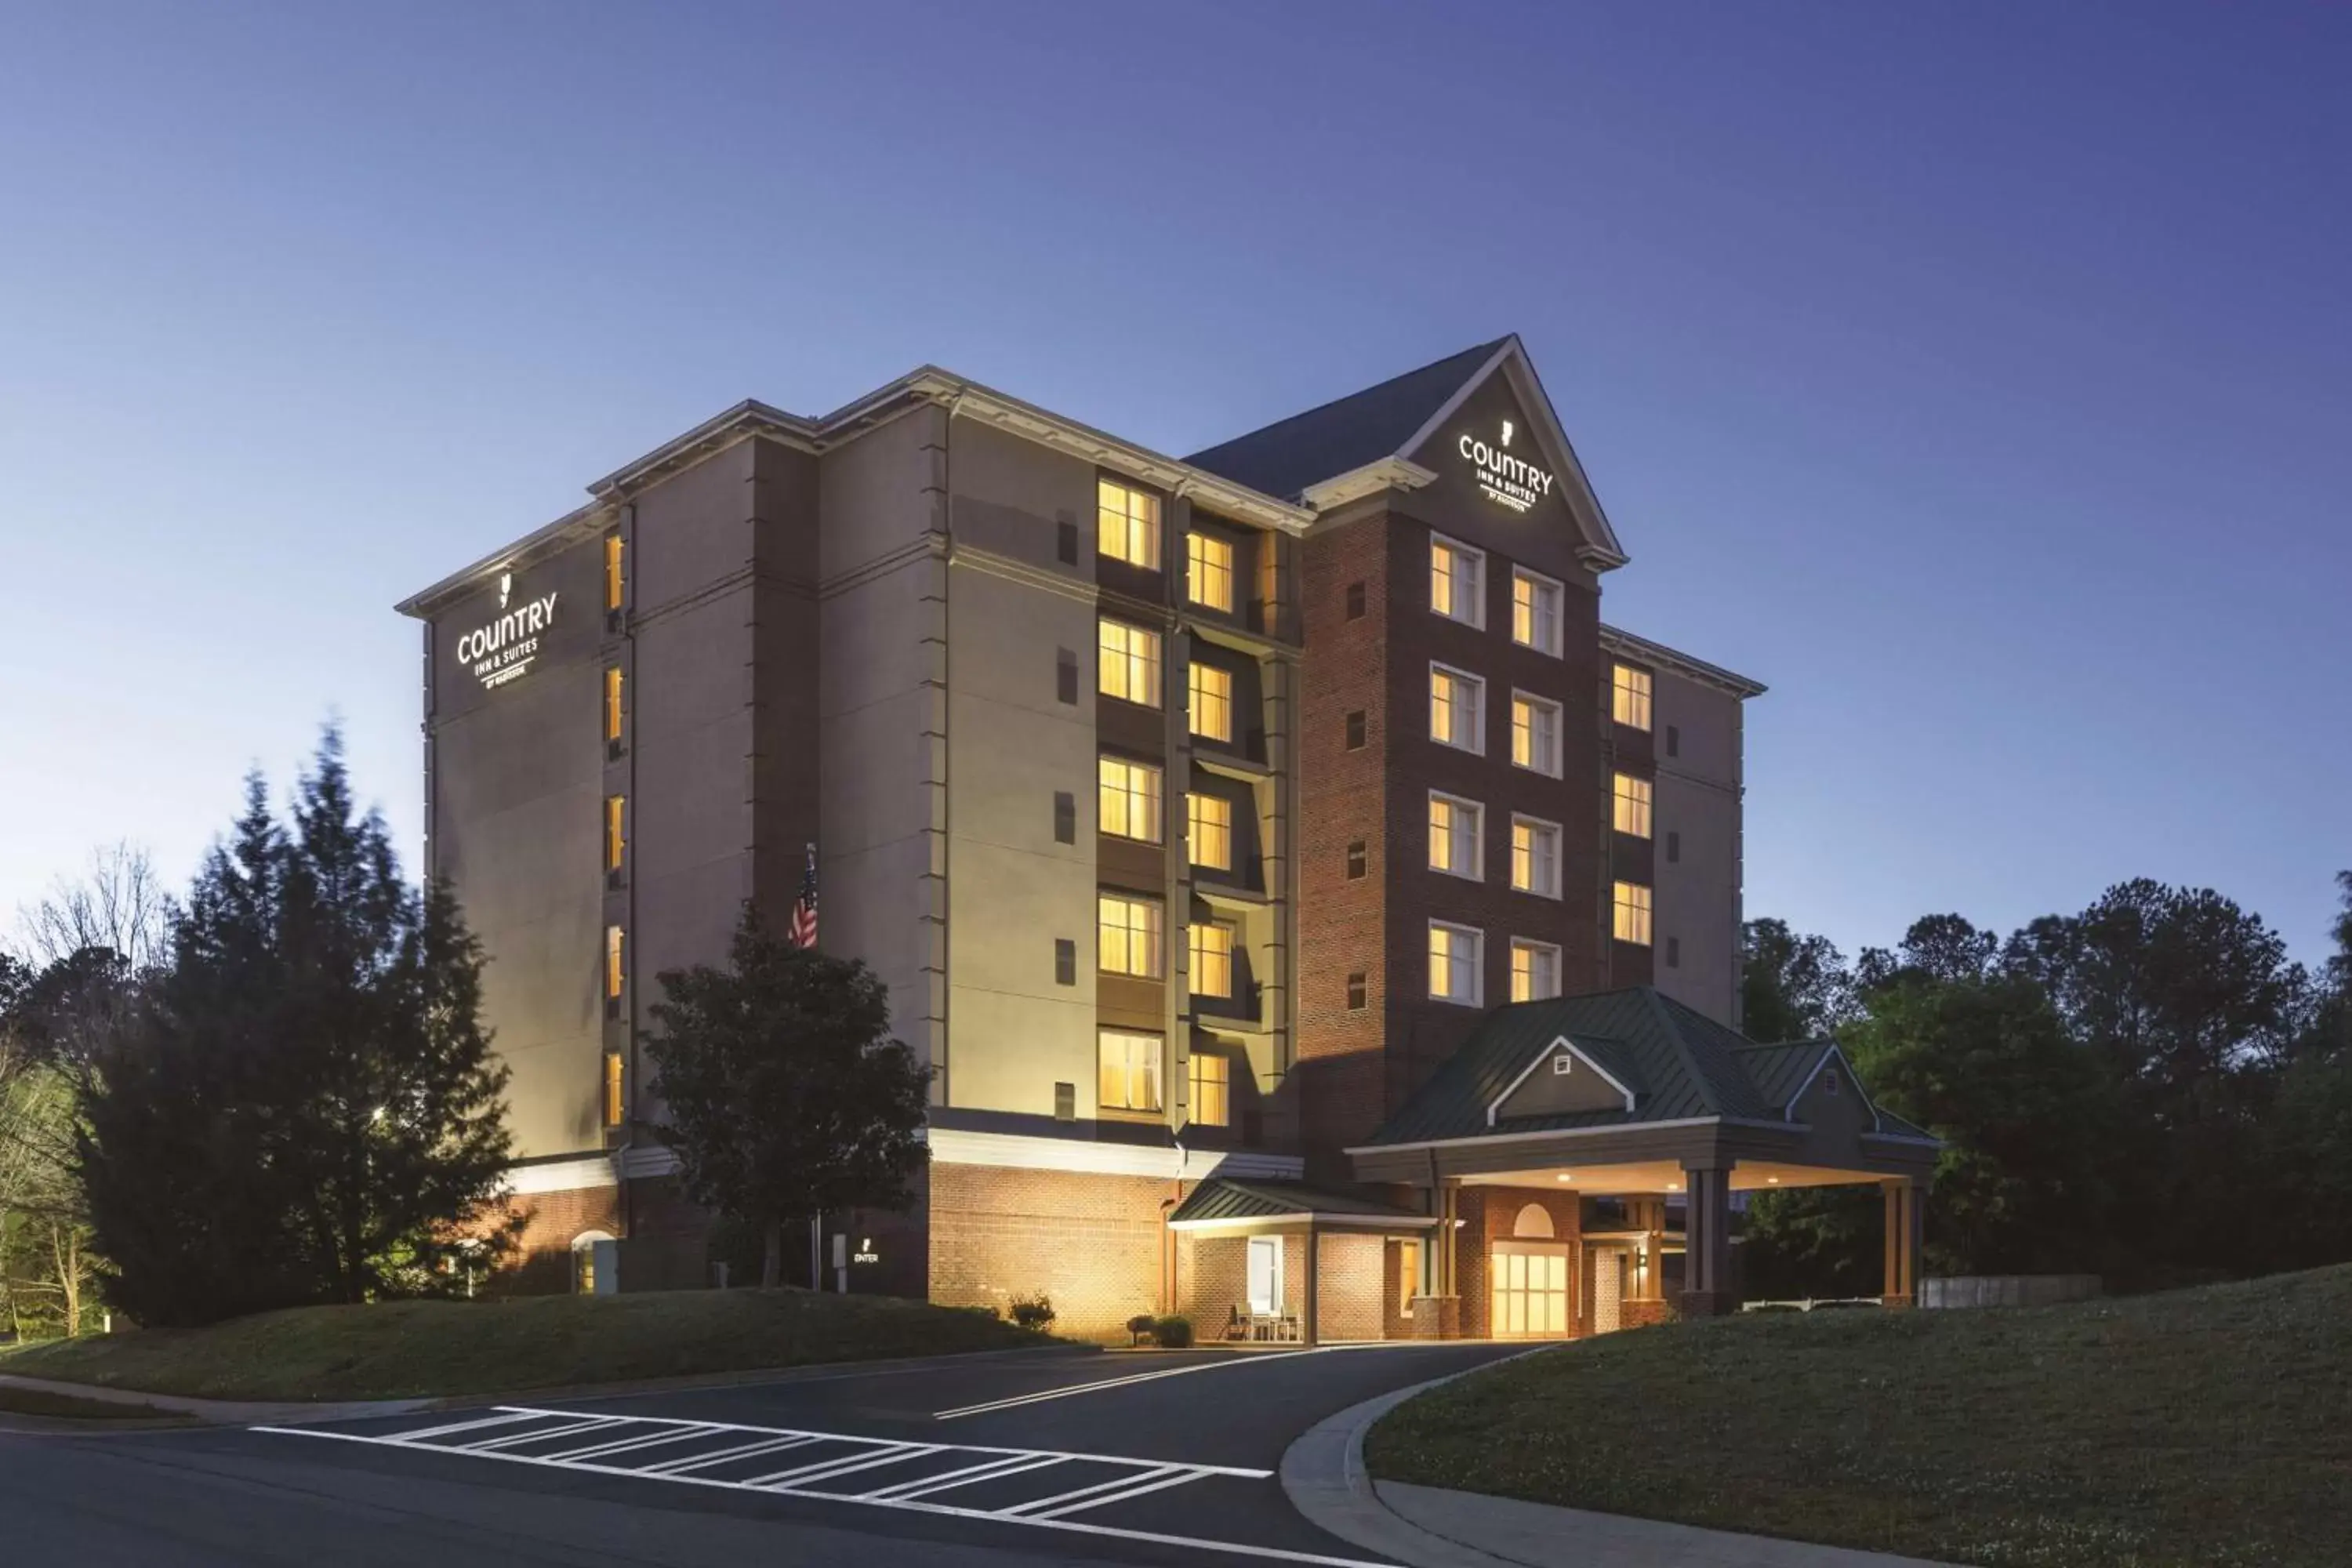 Property Building in Country Inn & Suites by Radisson, Conyers, GA